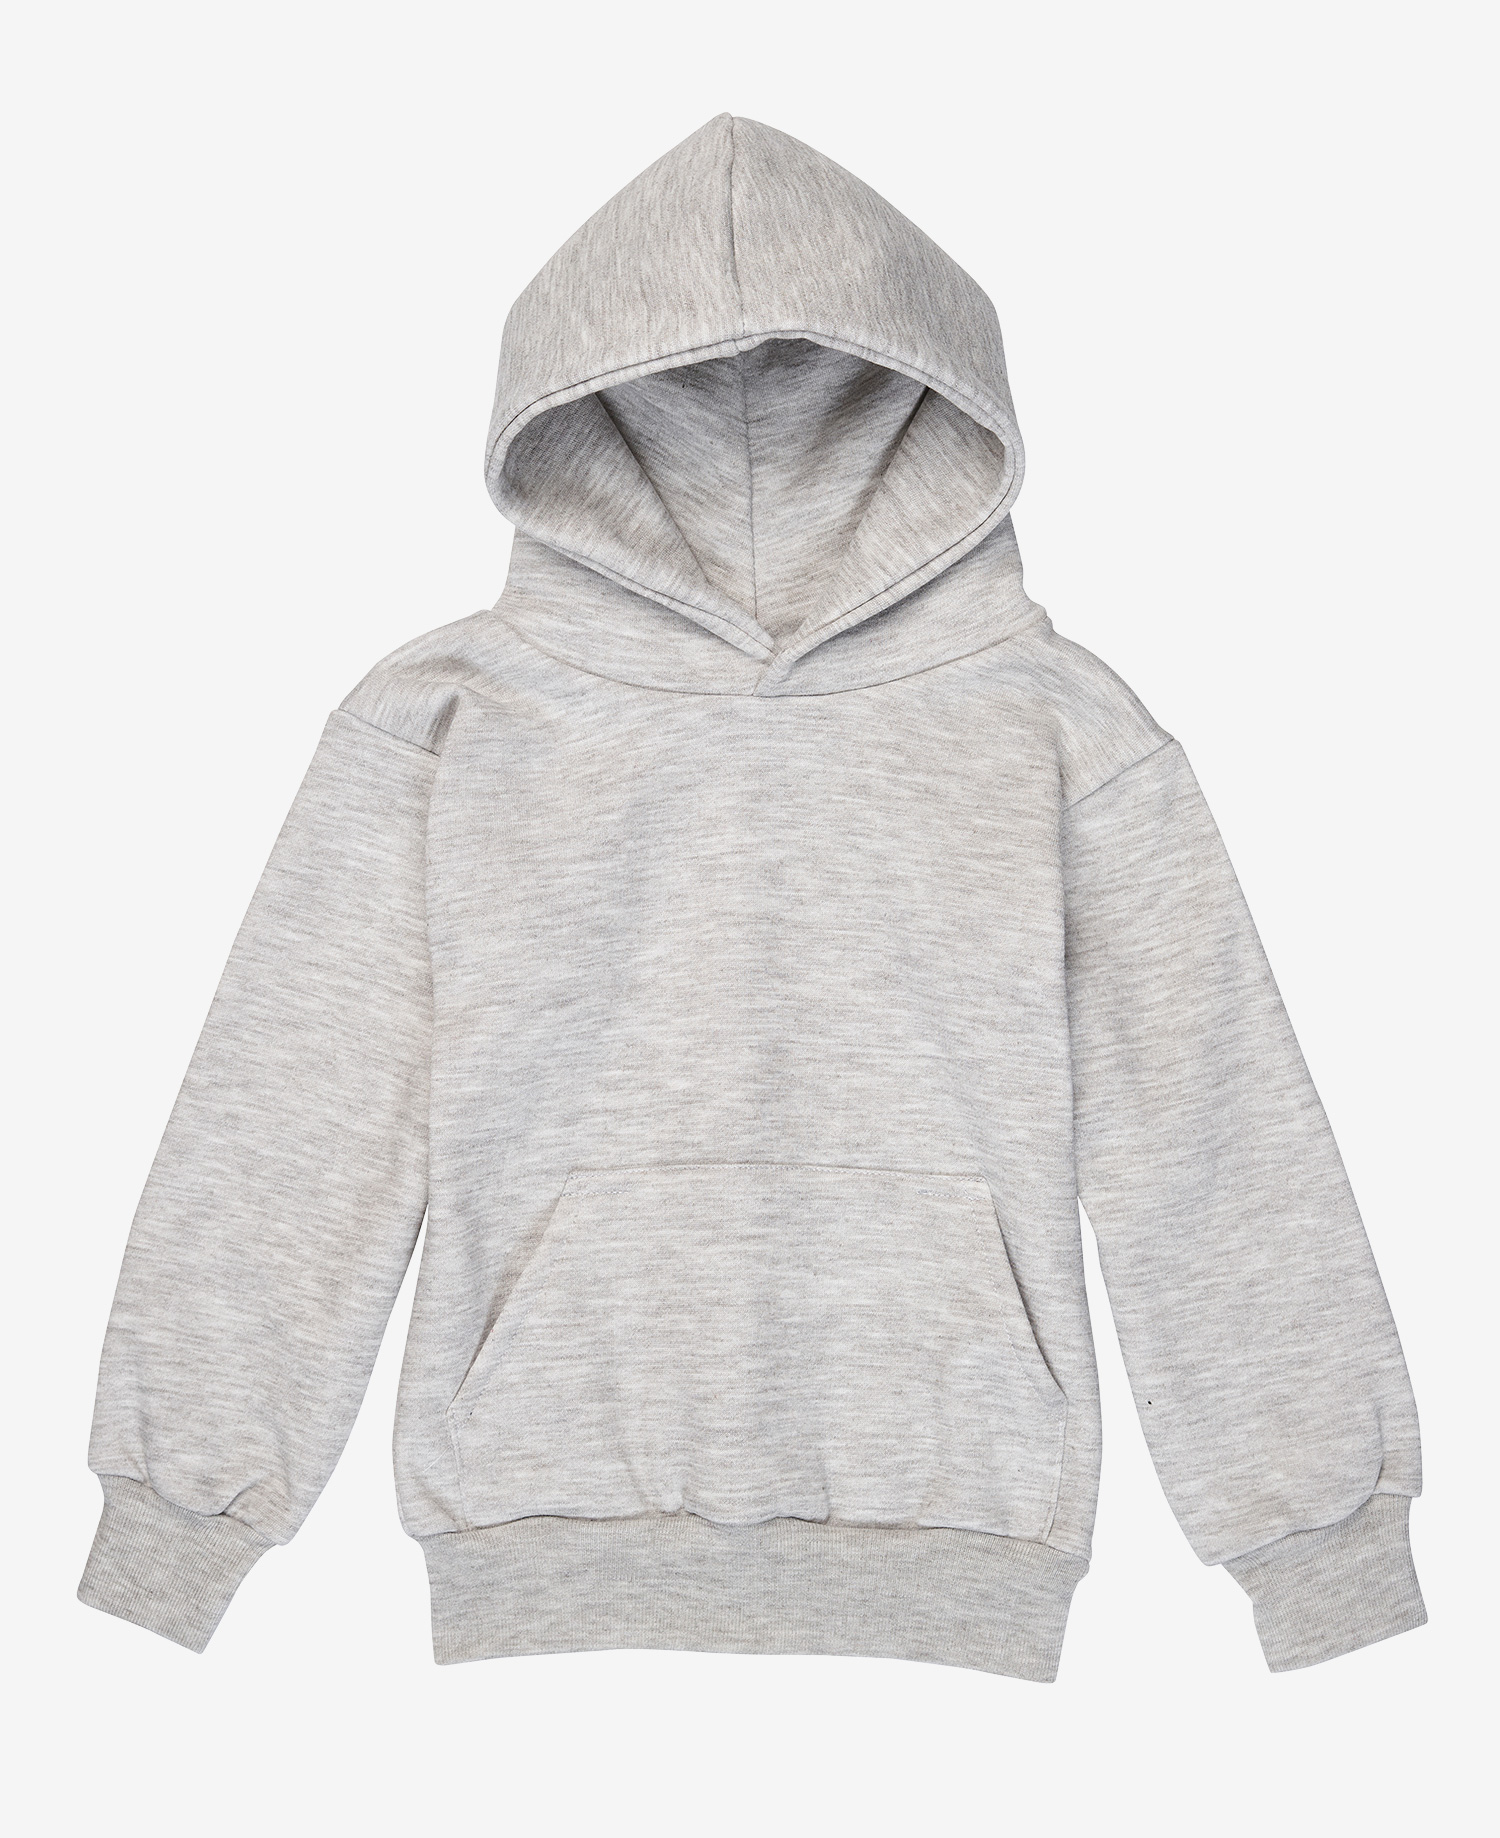 Hoody Pullover with pouch pocket - Diamond Textiles